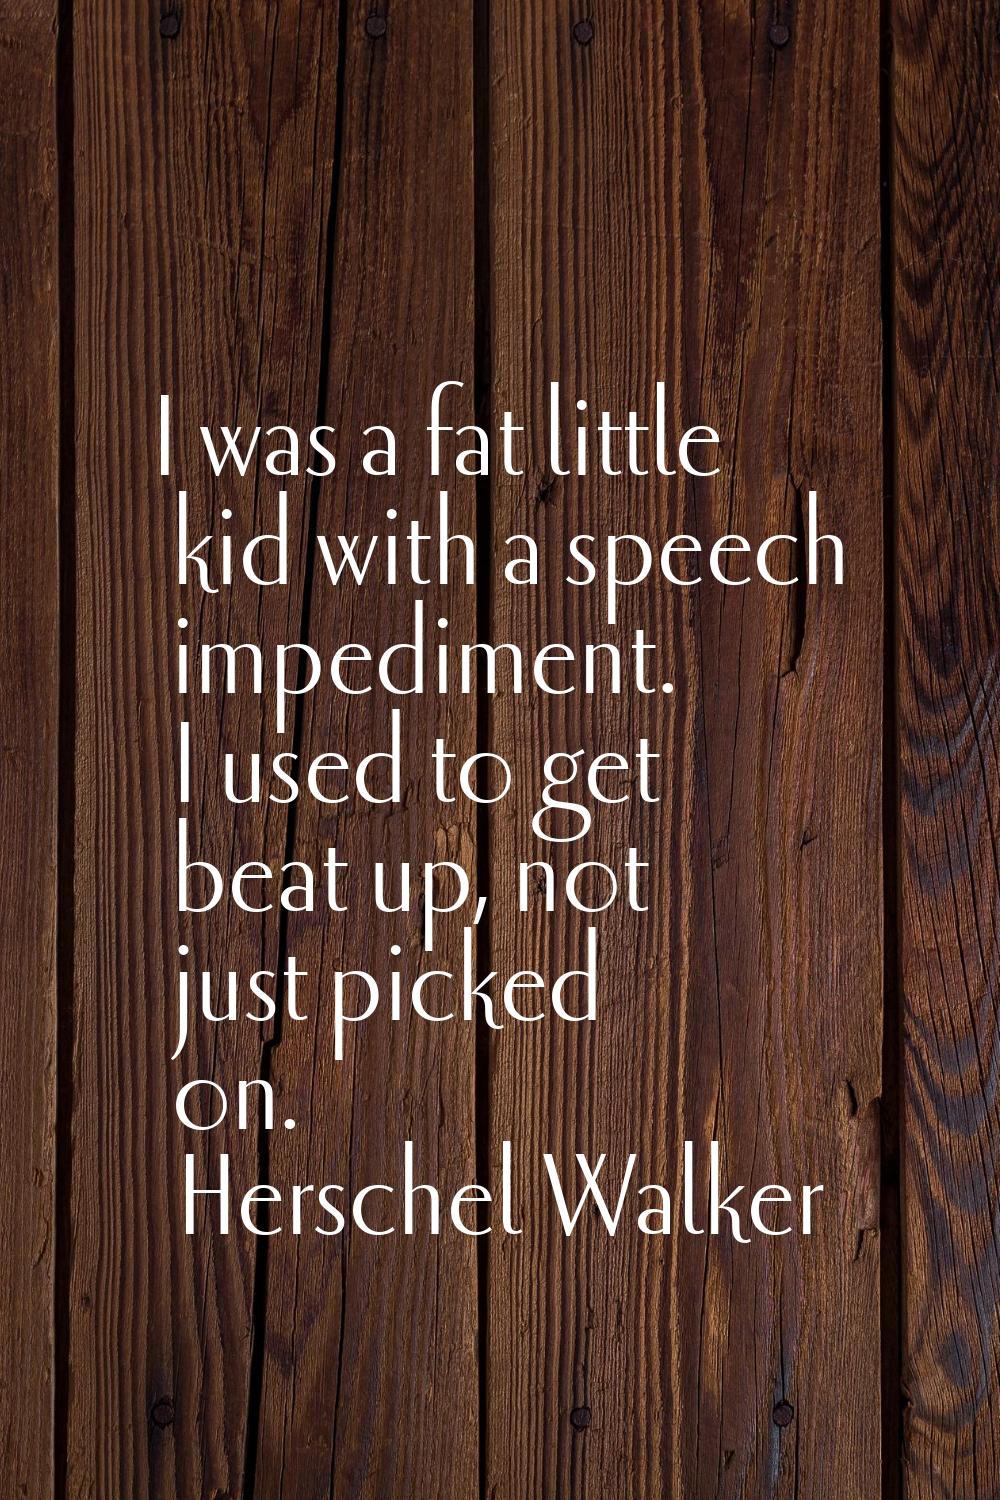 I was a fat little kid with a speech impediment. I used to get beat up, not just picked on.